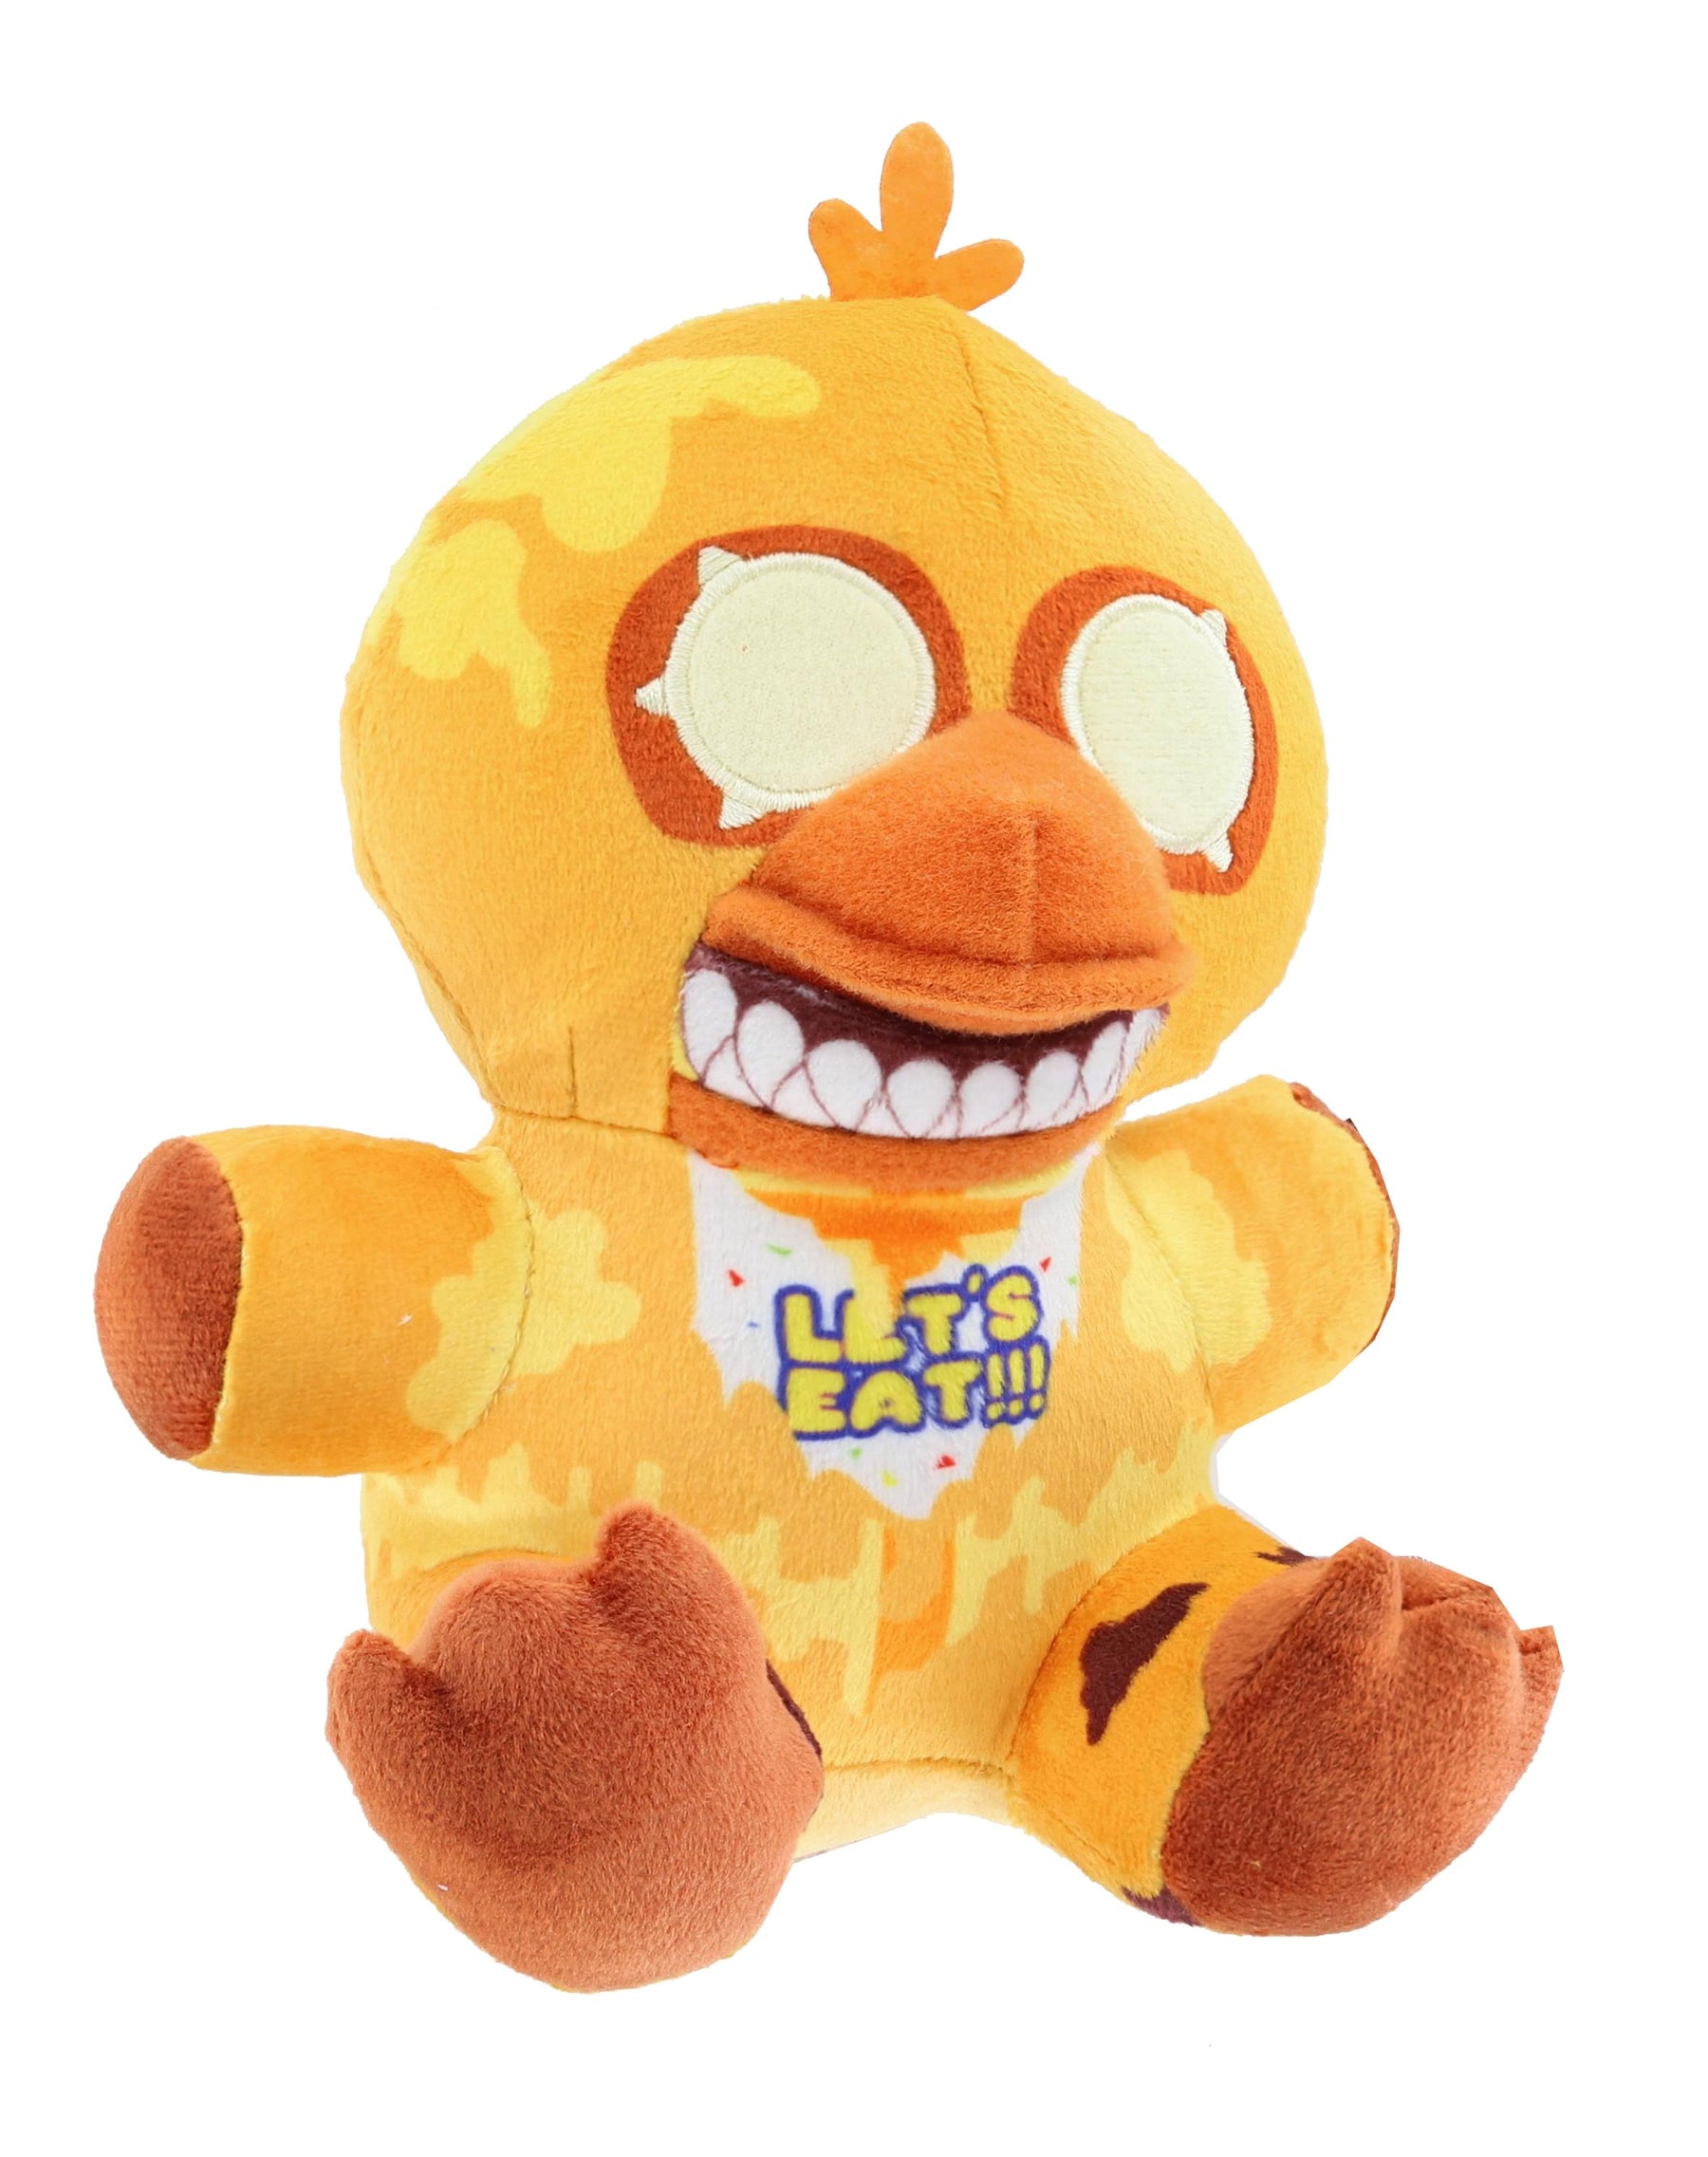 Funko Five Nights at Freddy's Toy Chica Plush, 6 